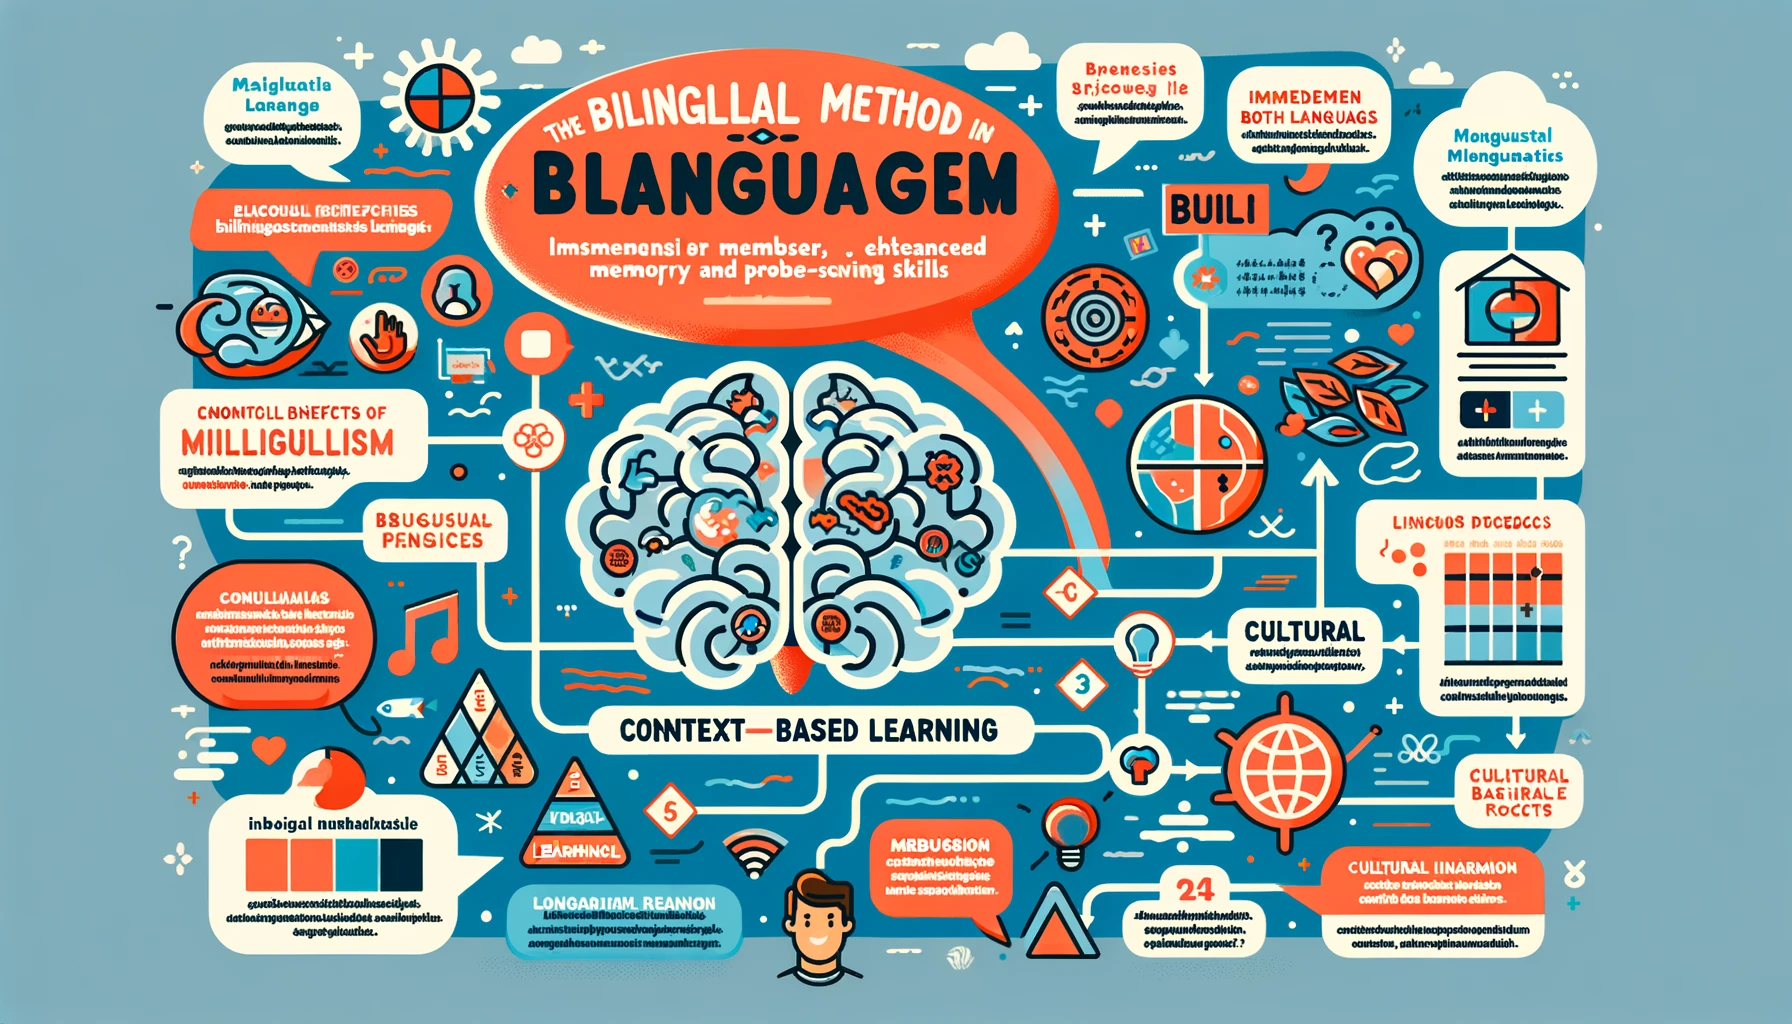 Creating infographics for the "Bilingual Method in Language and Linguistics